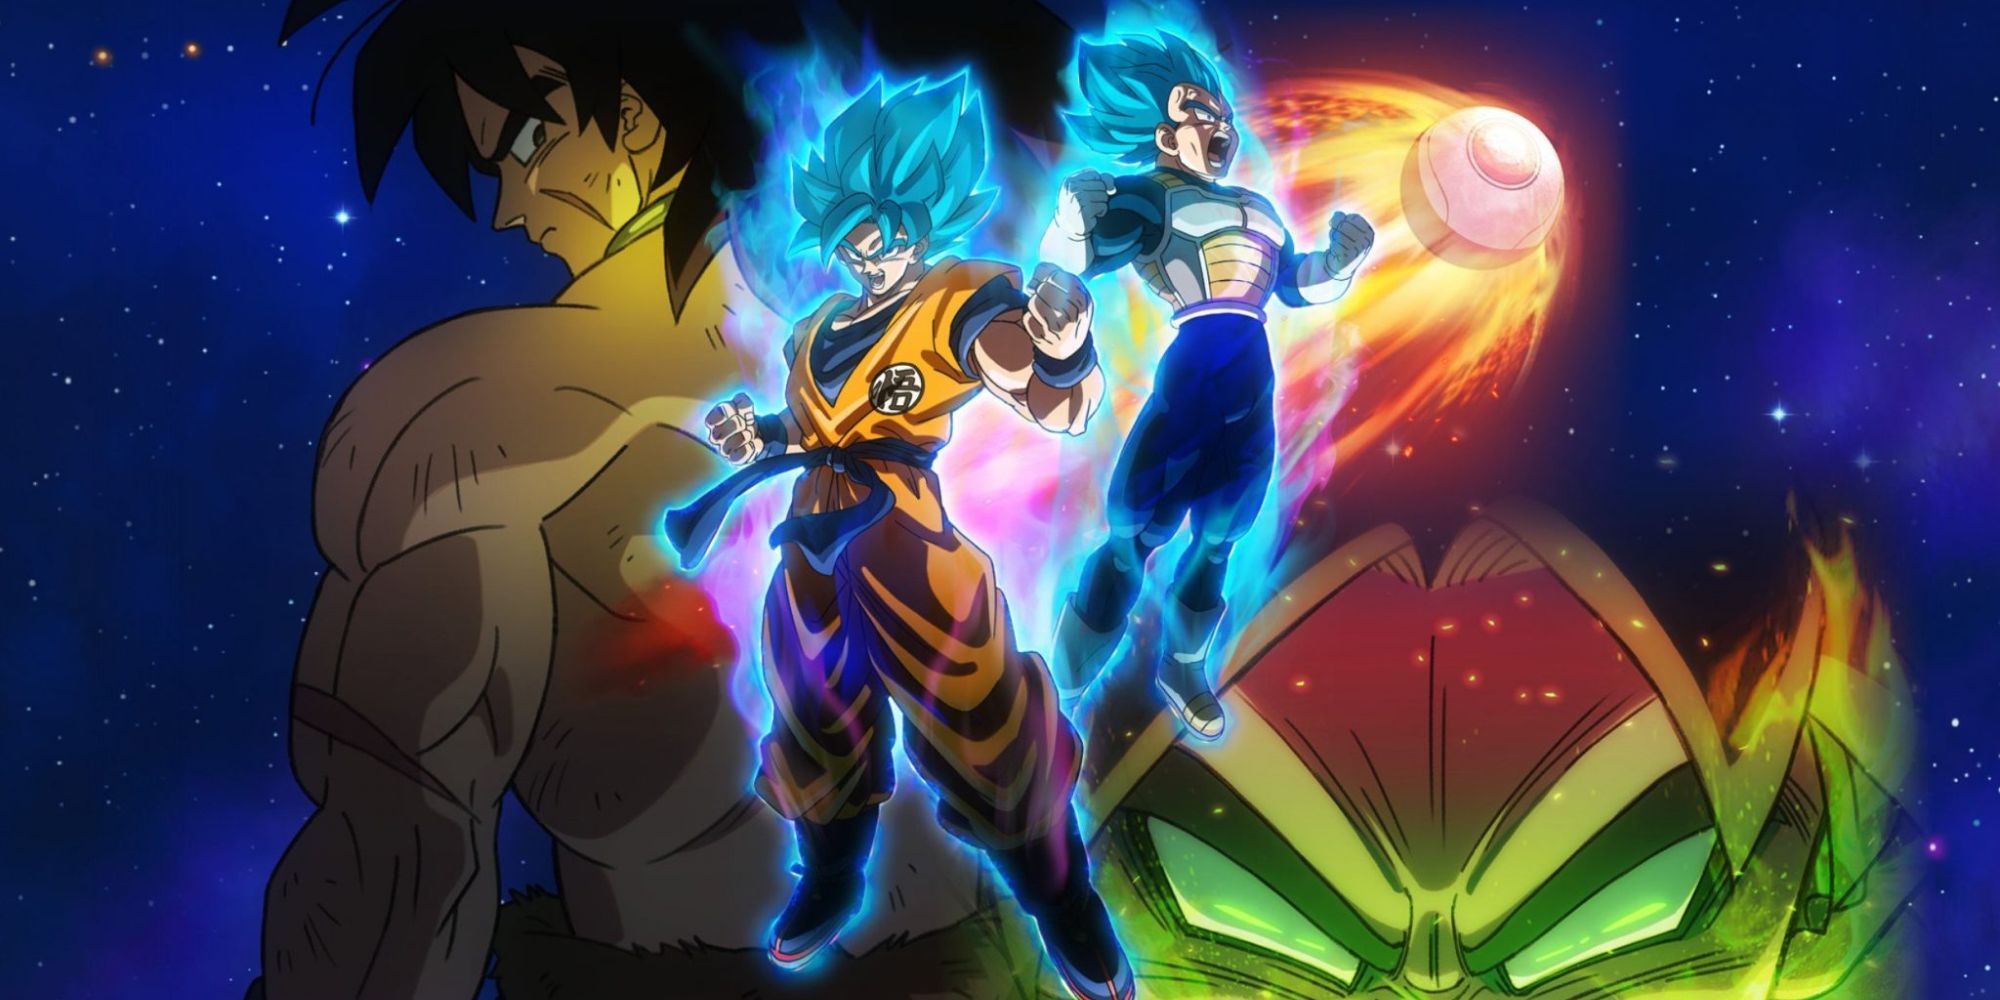 art of broly movie with saiyans hovering in the air